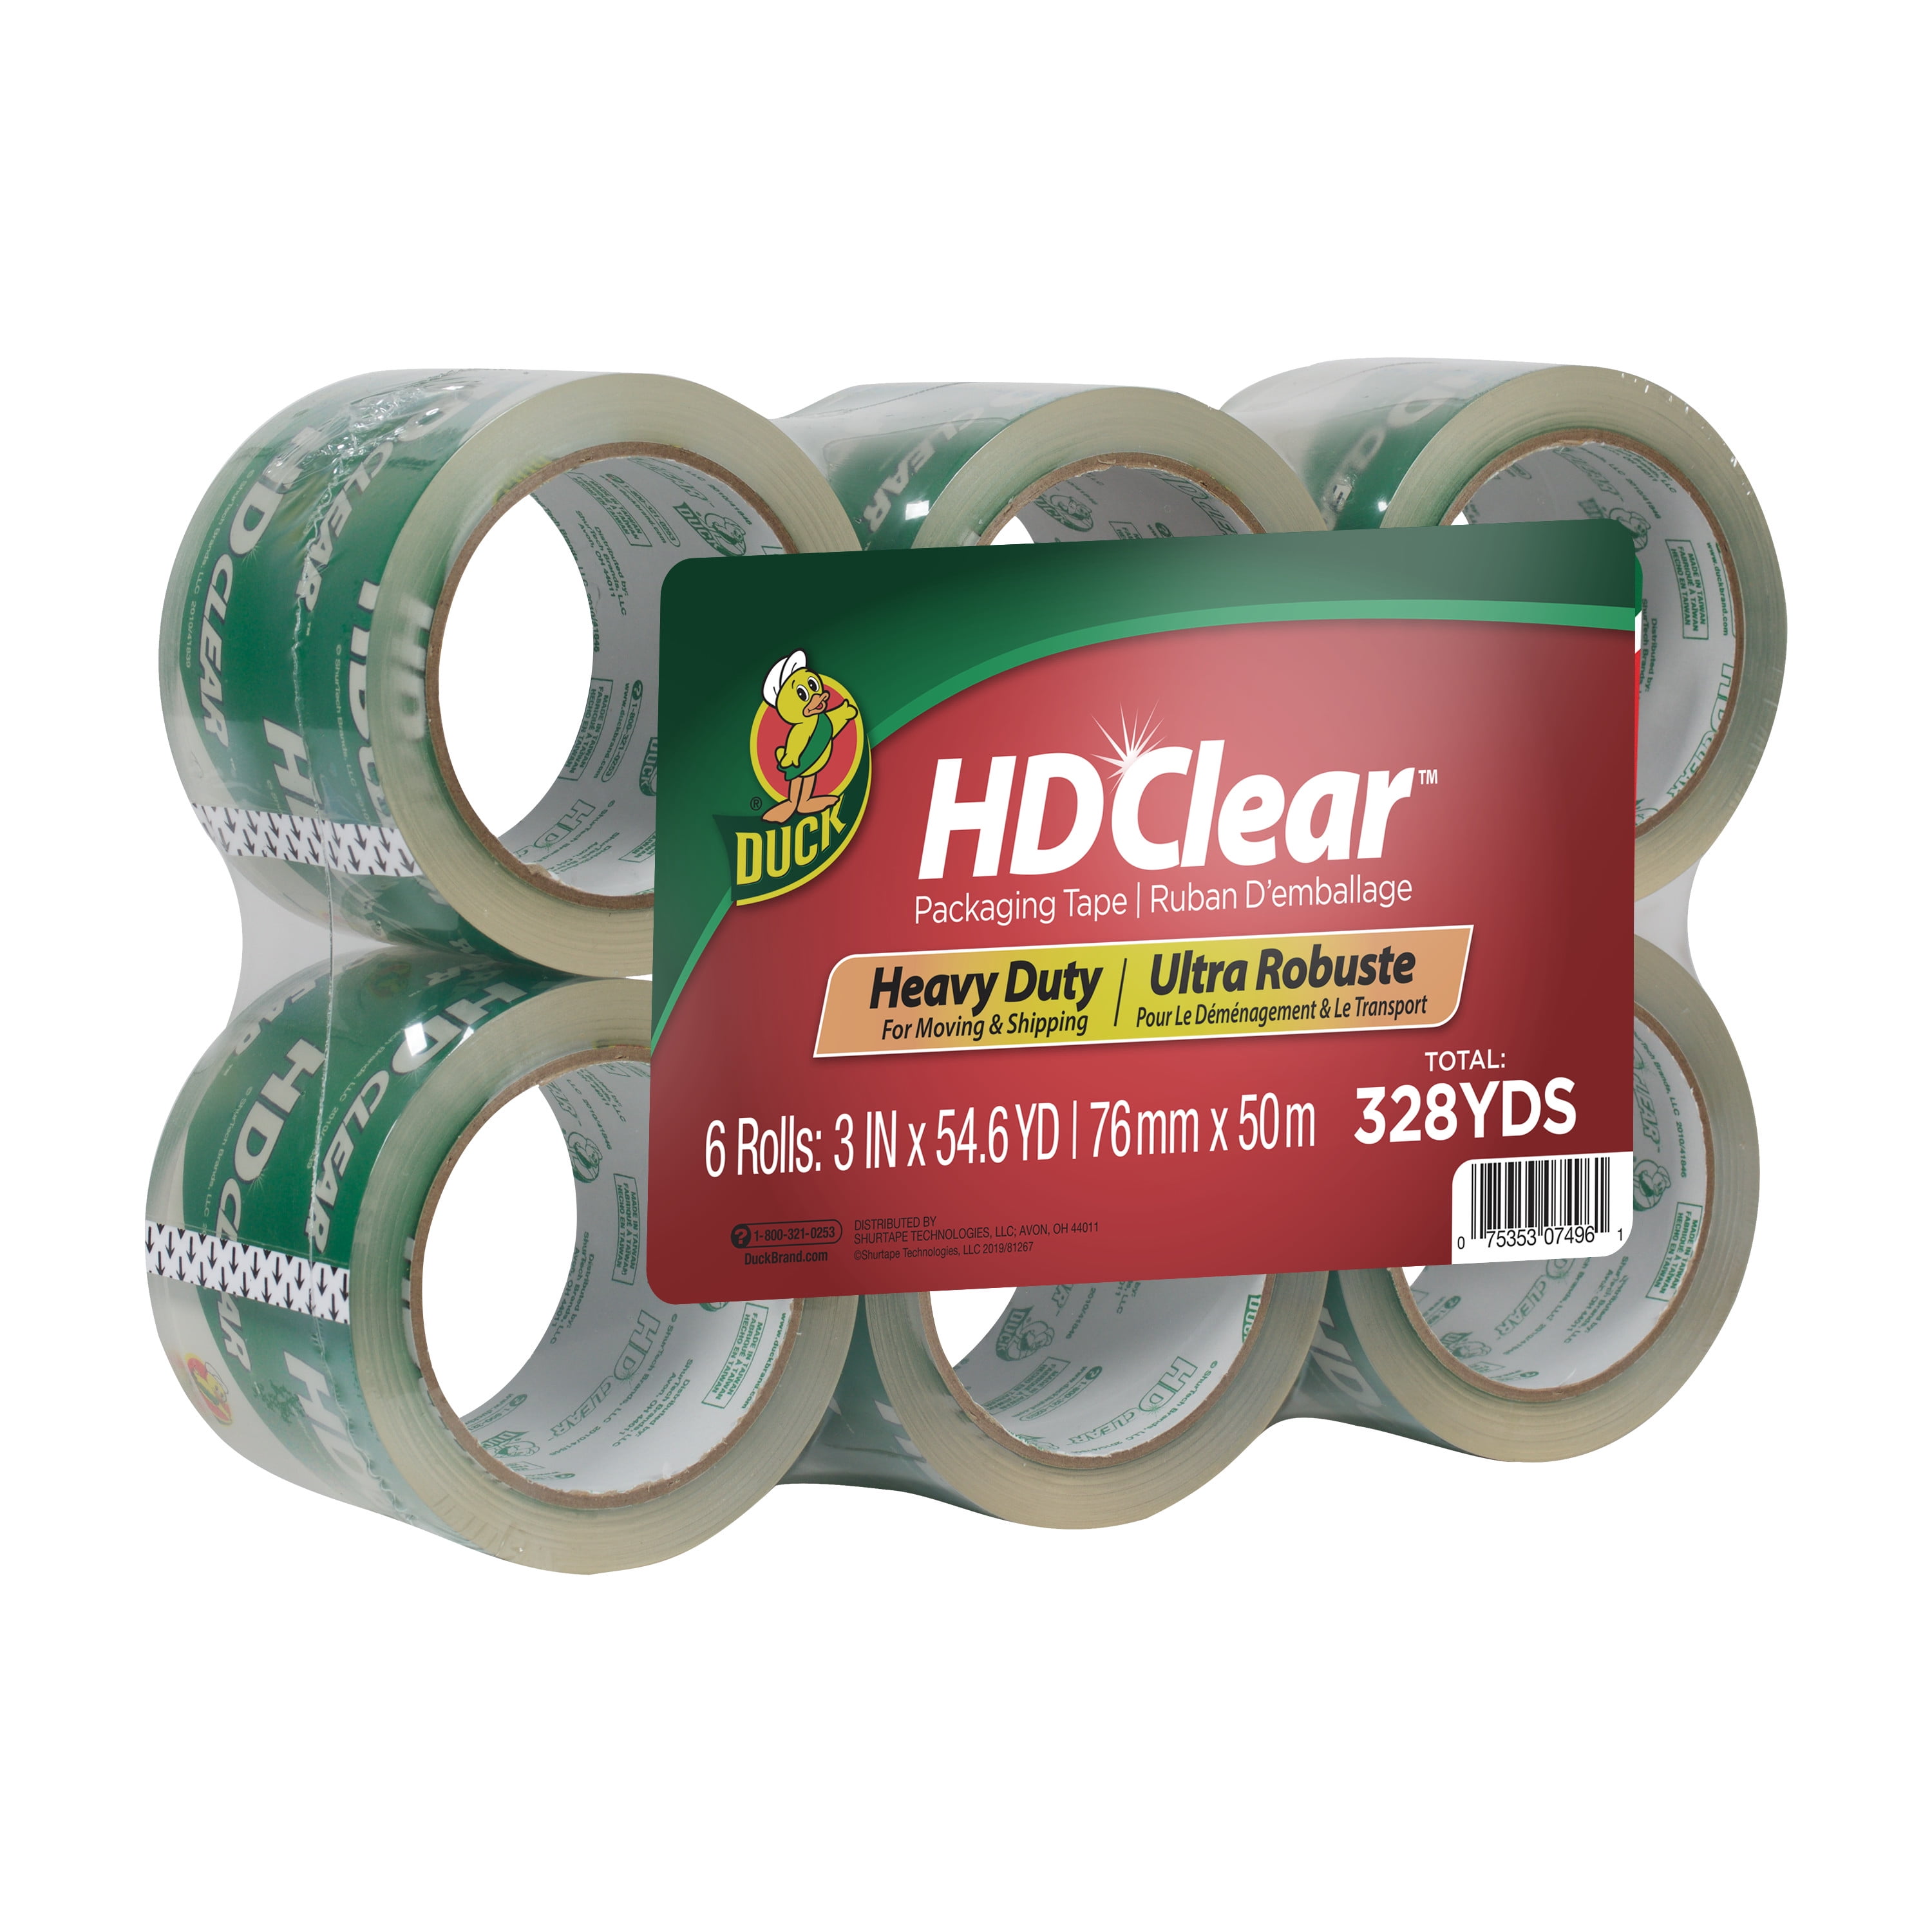 Duck HD Clear Extra Wide Heavy Duty Packaging Tape 3 x 55 Yd. Clear Pack Of  6 - Office Depot